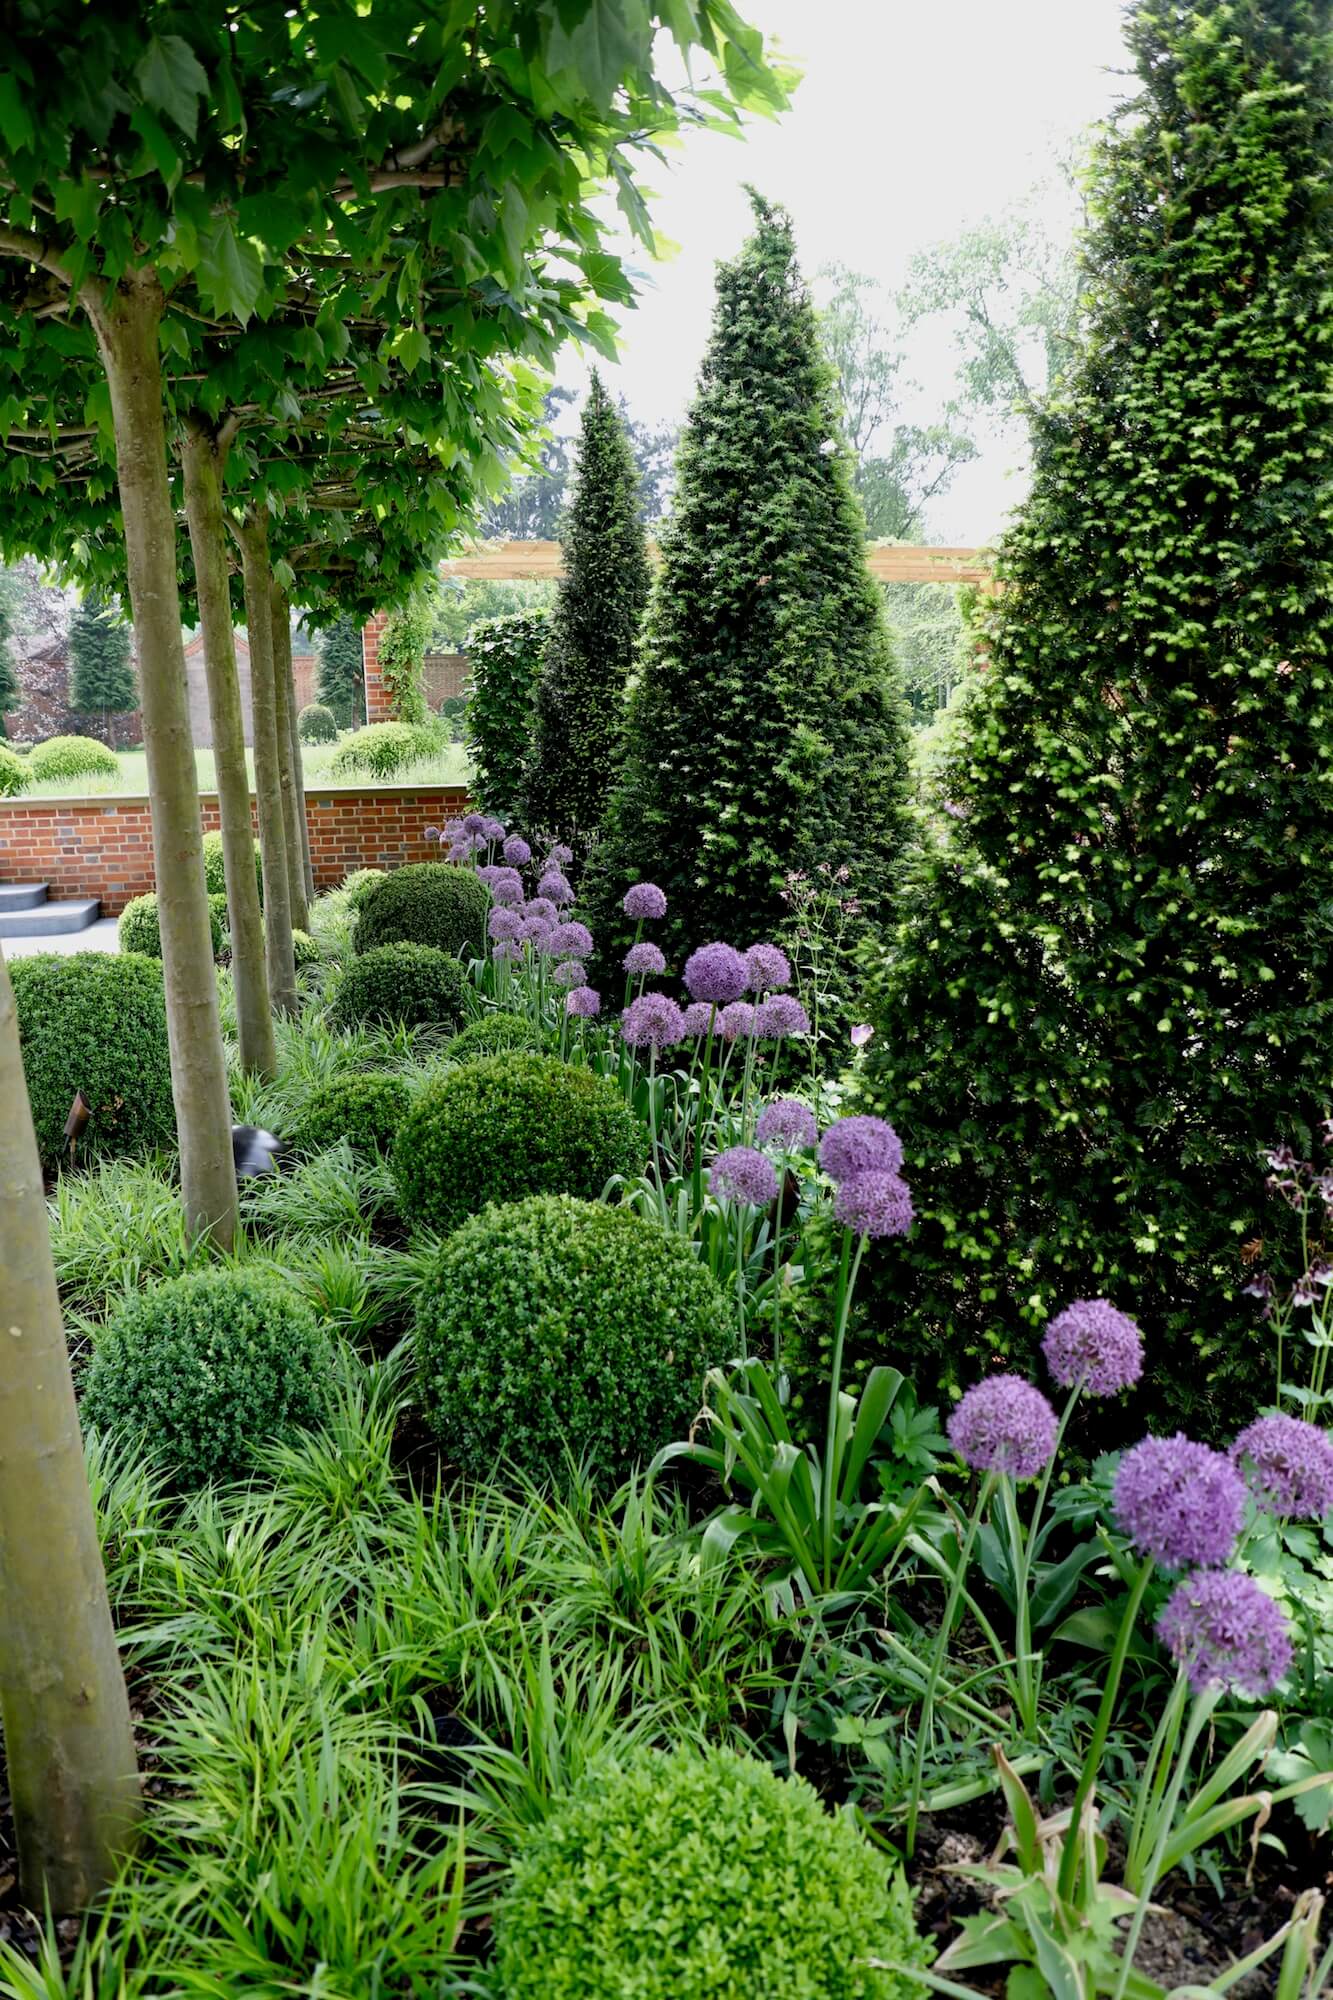 topiary cones and balls with alliums in purple and grasses